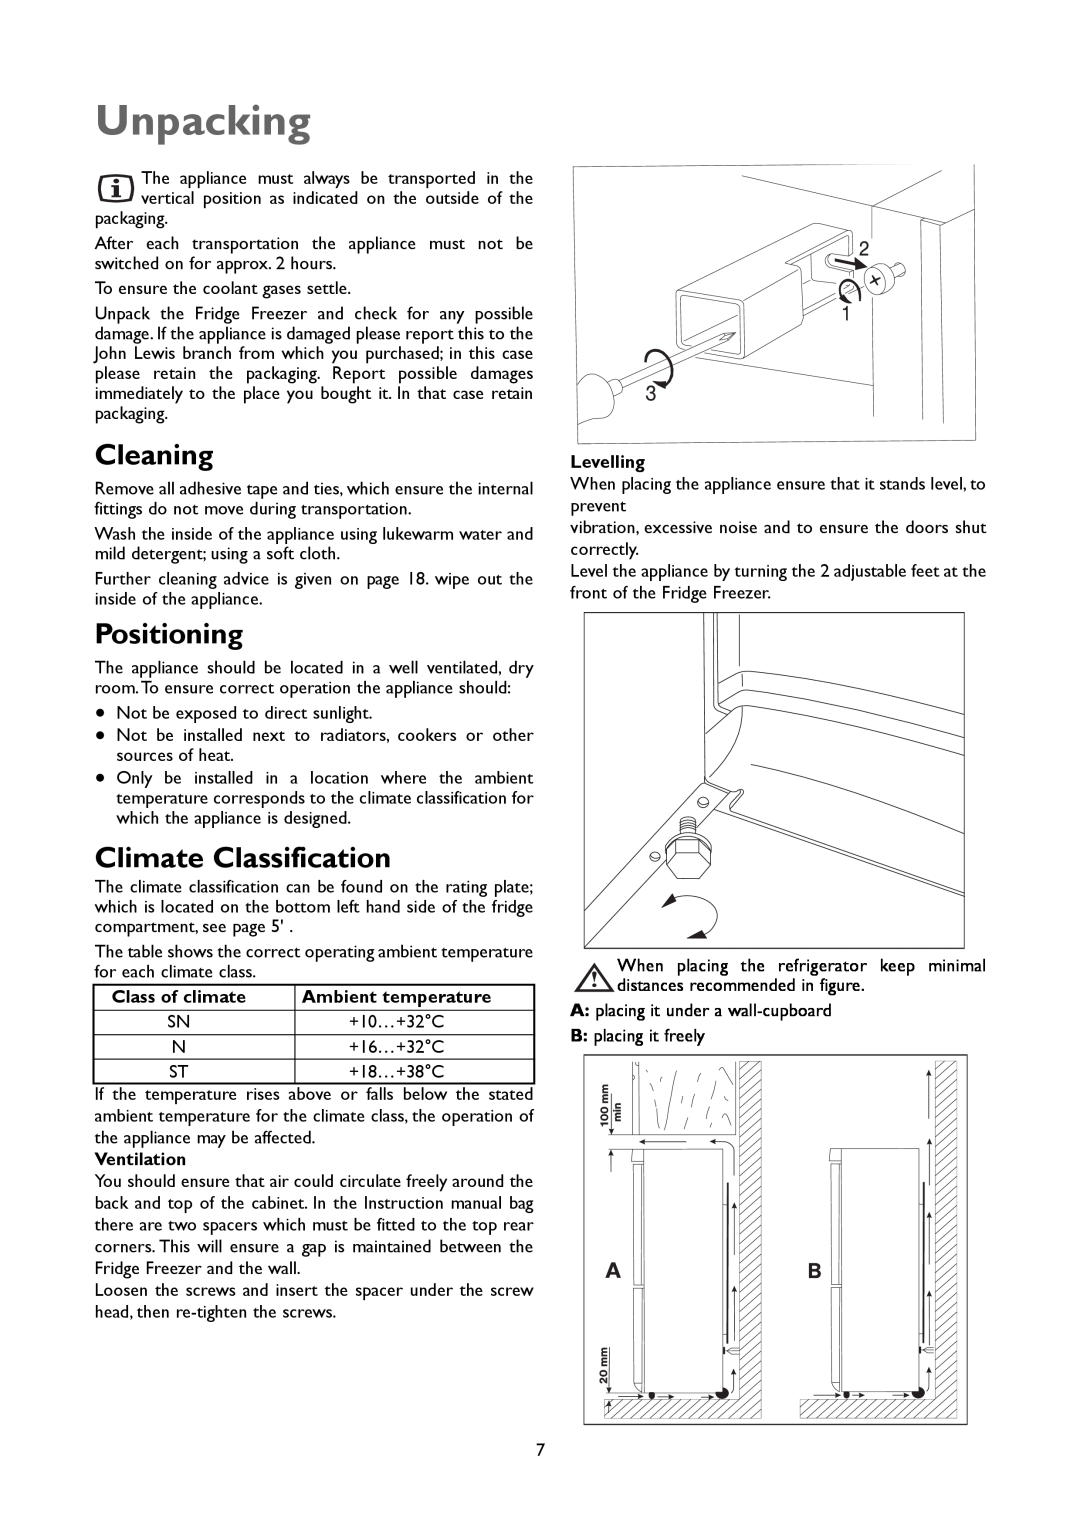 John Lewis JLFFW2004 instruction manual Unpacking, Cleaning, Positioning, Climate Classification 